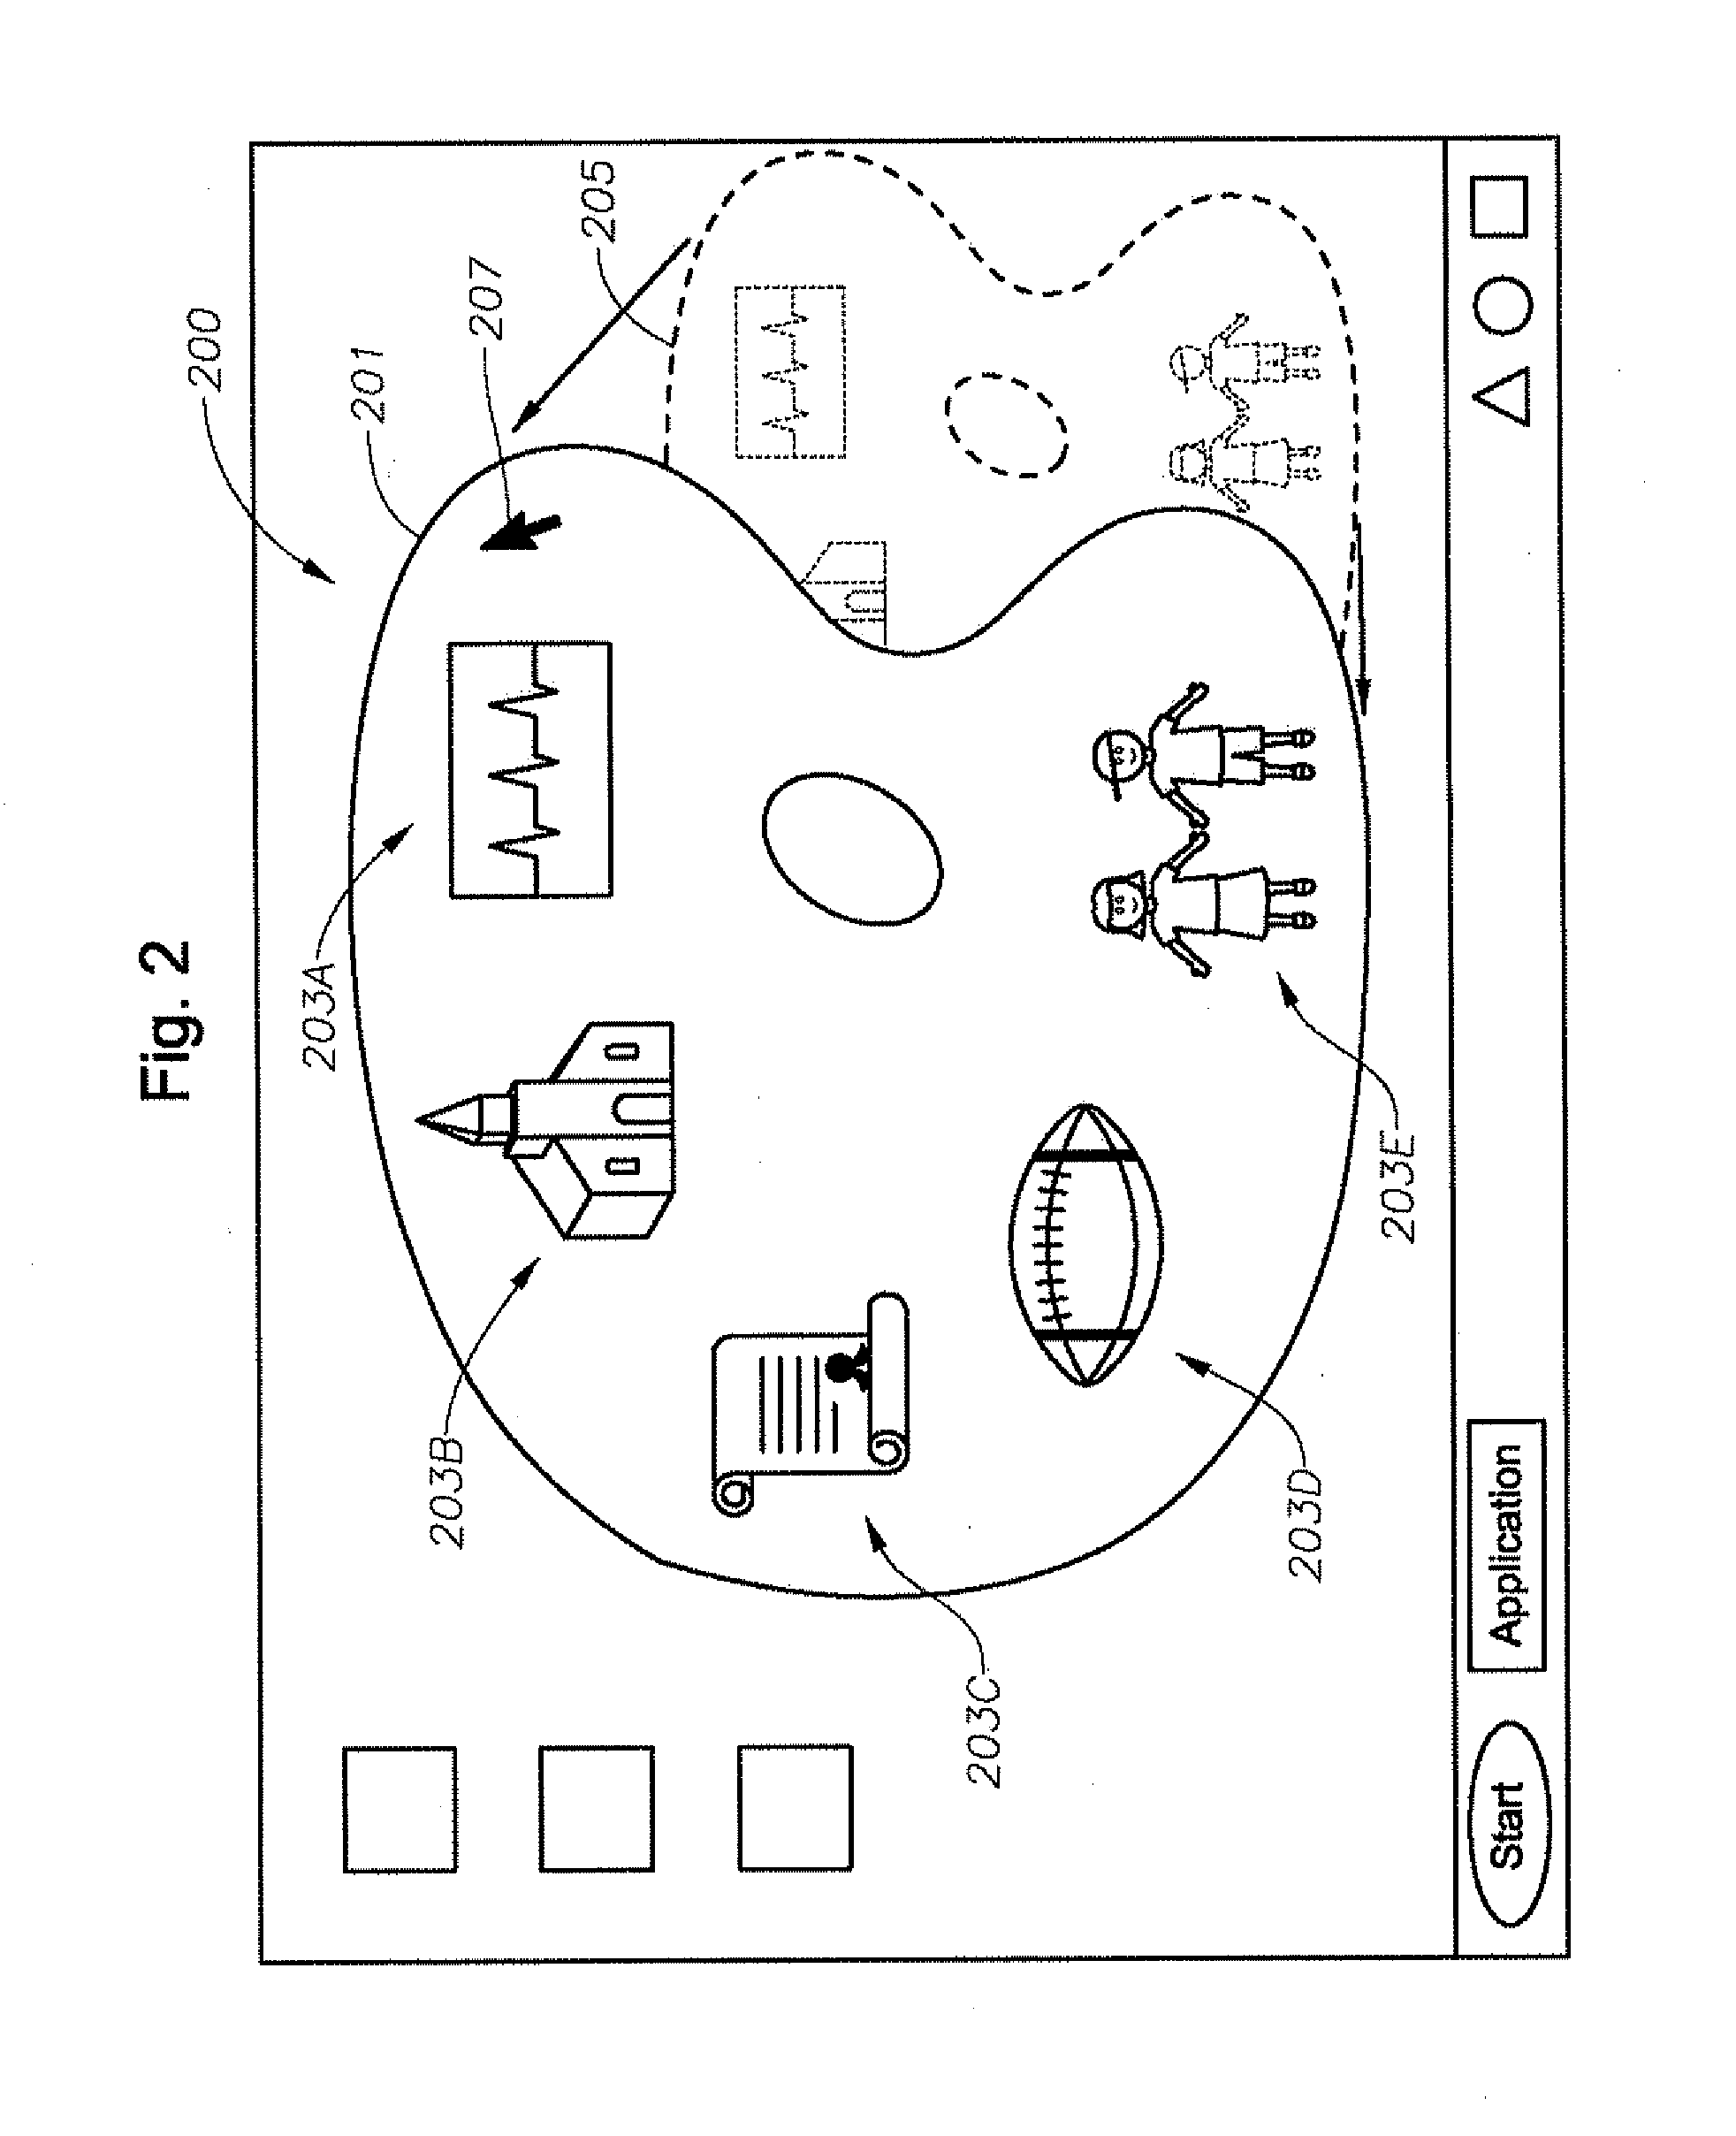 Machine, Program Product, And Computer-Implemented Method For File Management, Storage, And Display